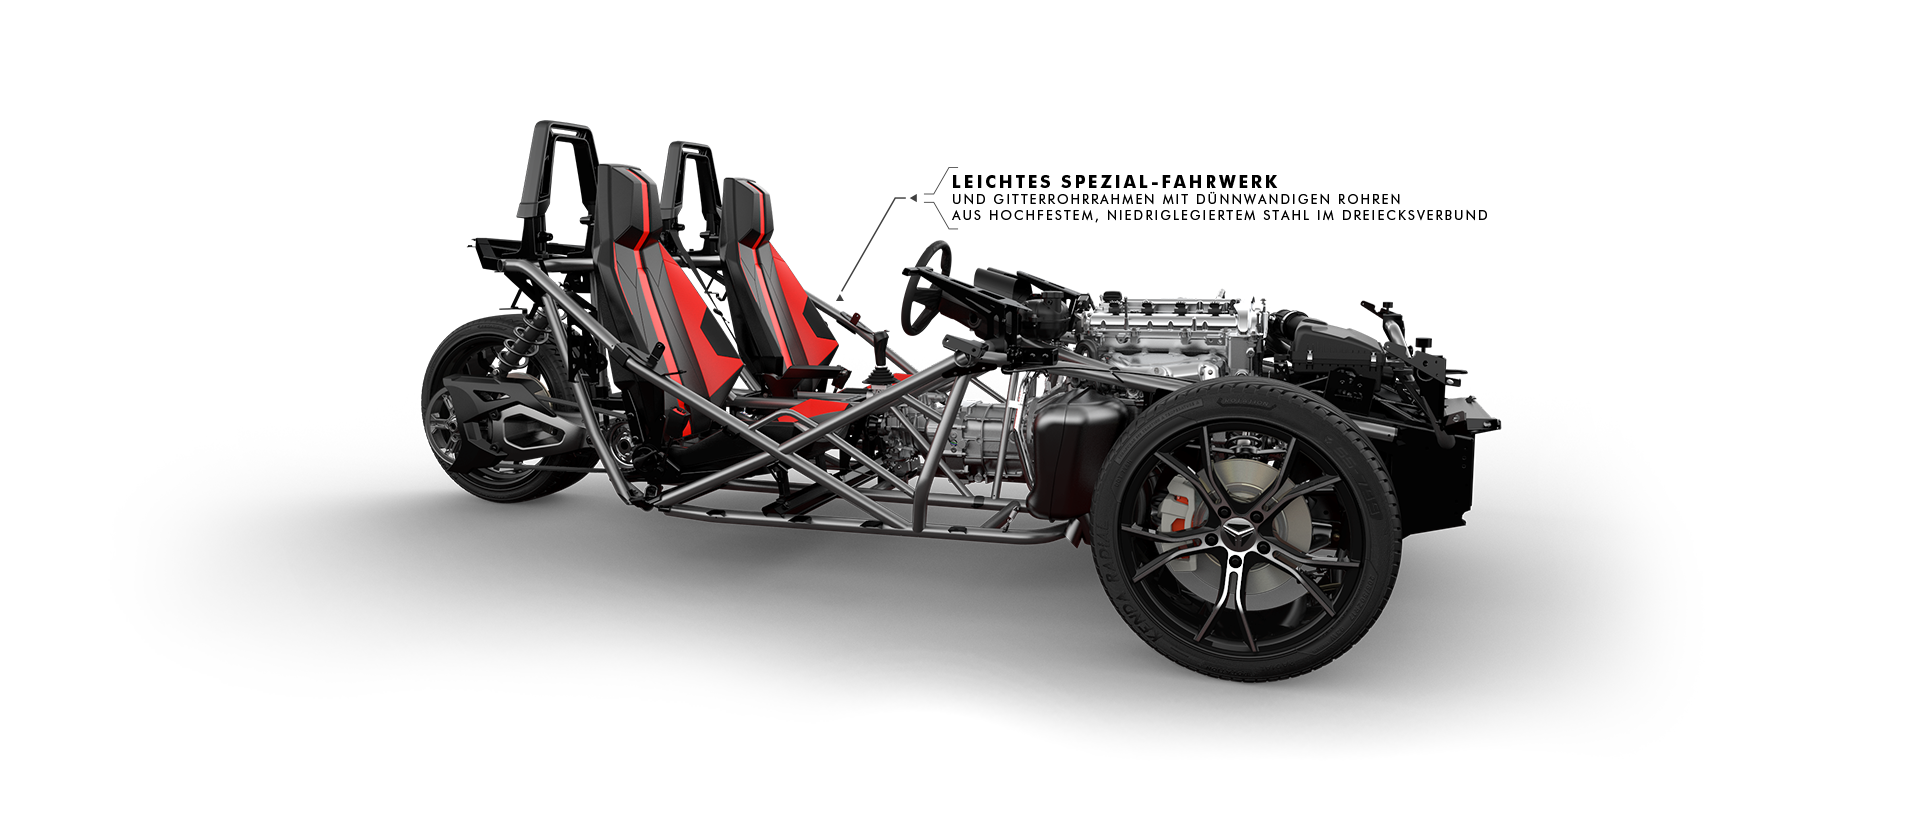 1 SLG Features Chassis